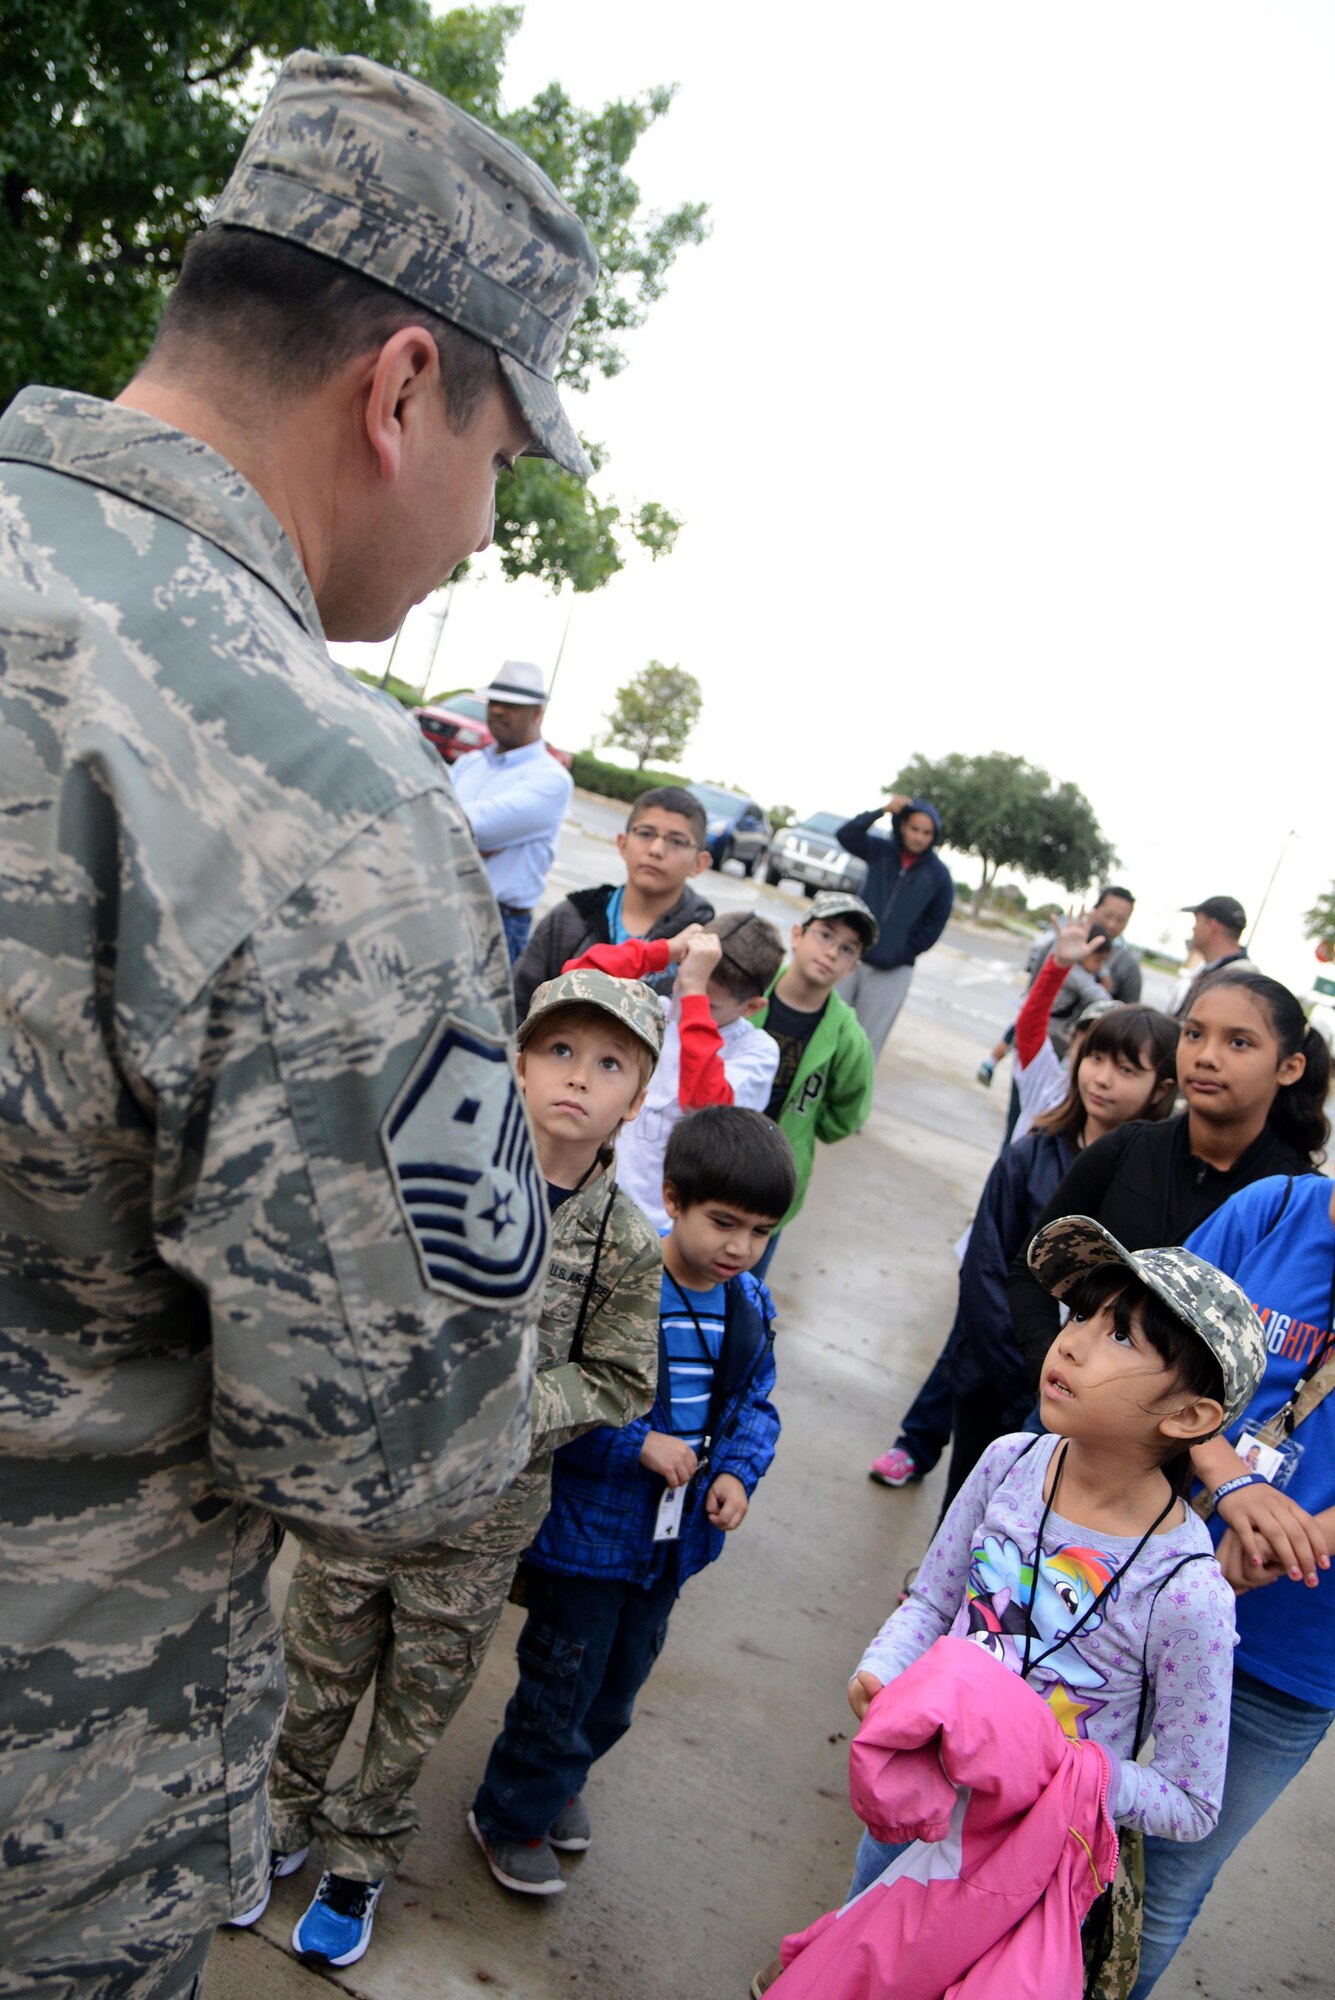 Master Sgt. Abraham Avila, 47th Mission Support Group first sergeant, gives a briefing to military and local children on Laughlin Air Force Base, Texas, Nov. 7, 2015. Military members volunteered to man the deployment line, which simulated an out-processing system much like the one used by military members in preparation for real-world deployments. (U.S. Air Force photo by Airman 1st Class Ariel D. Partlow)